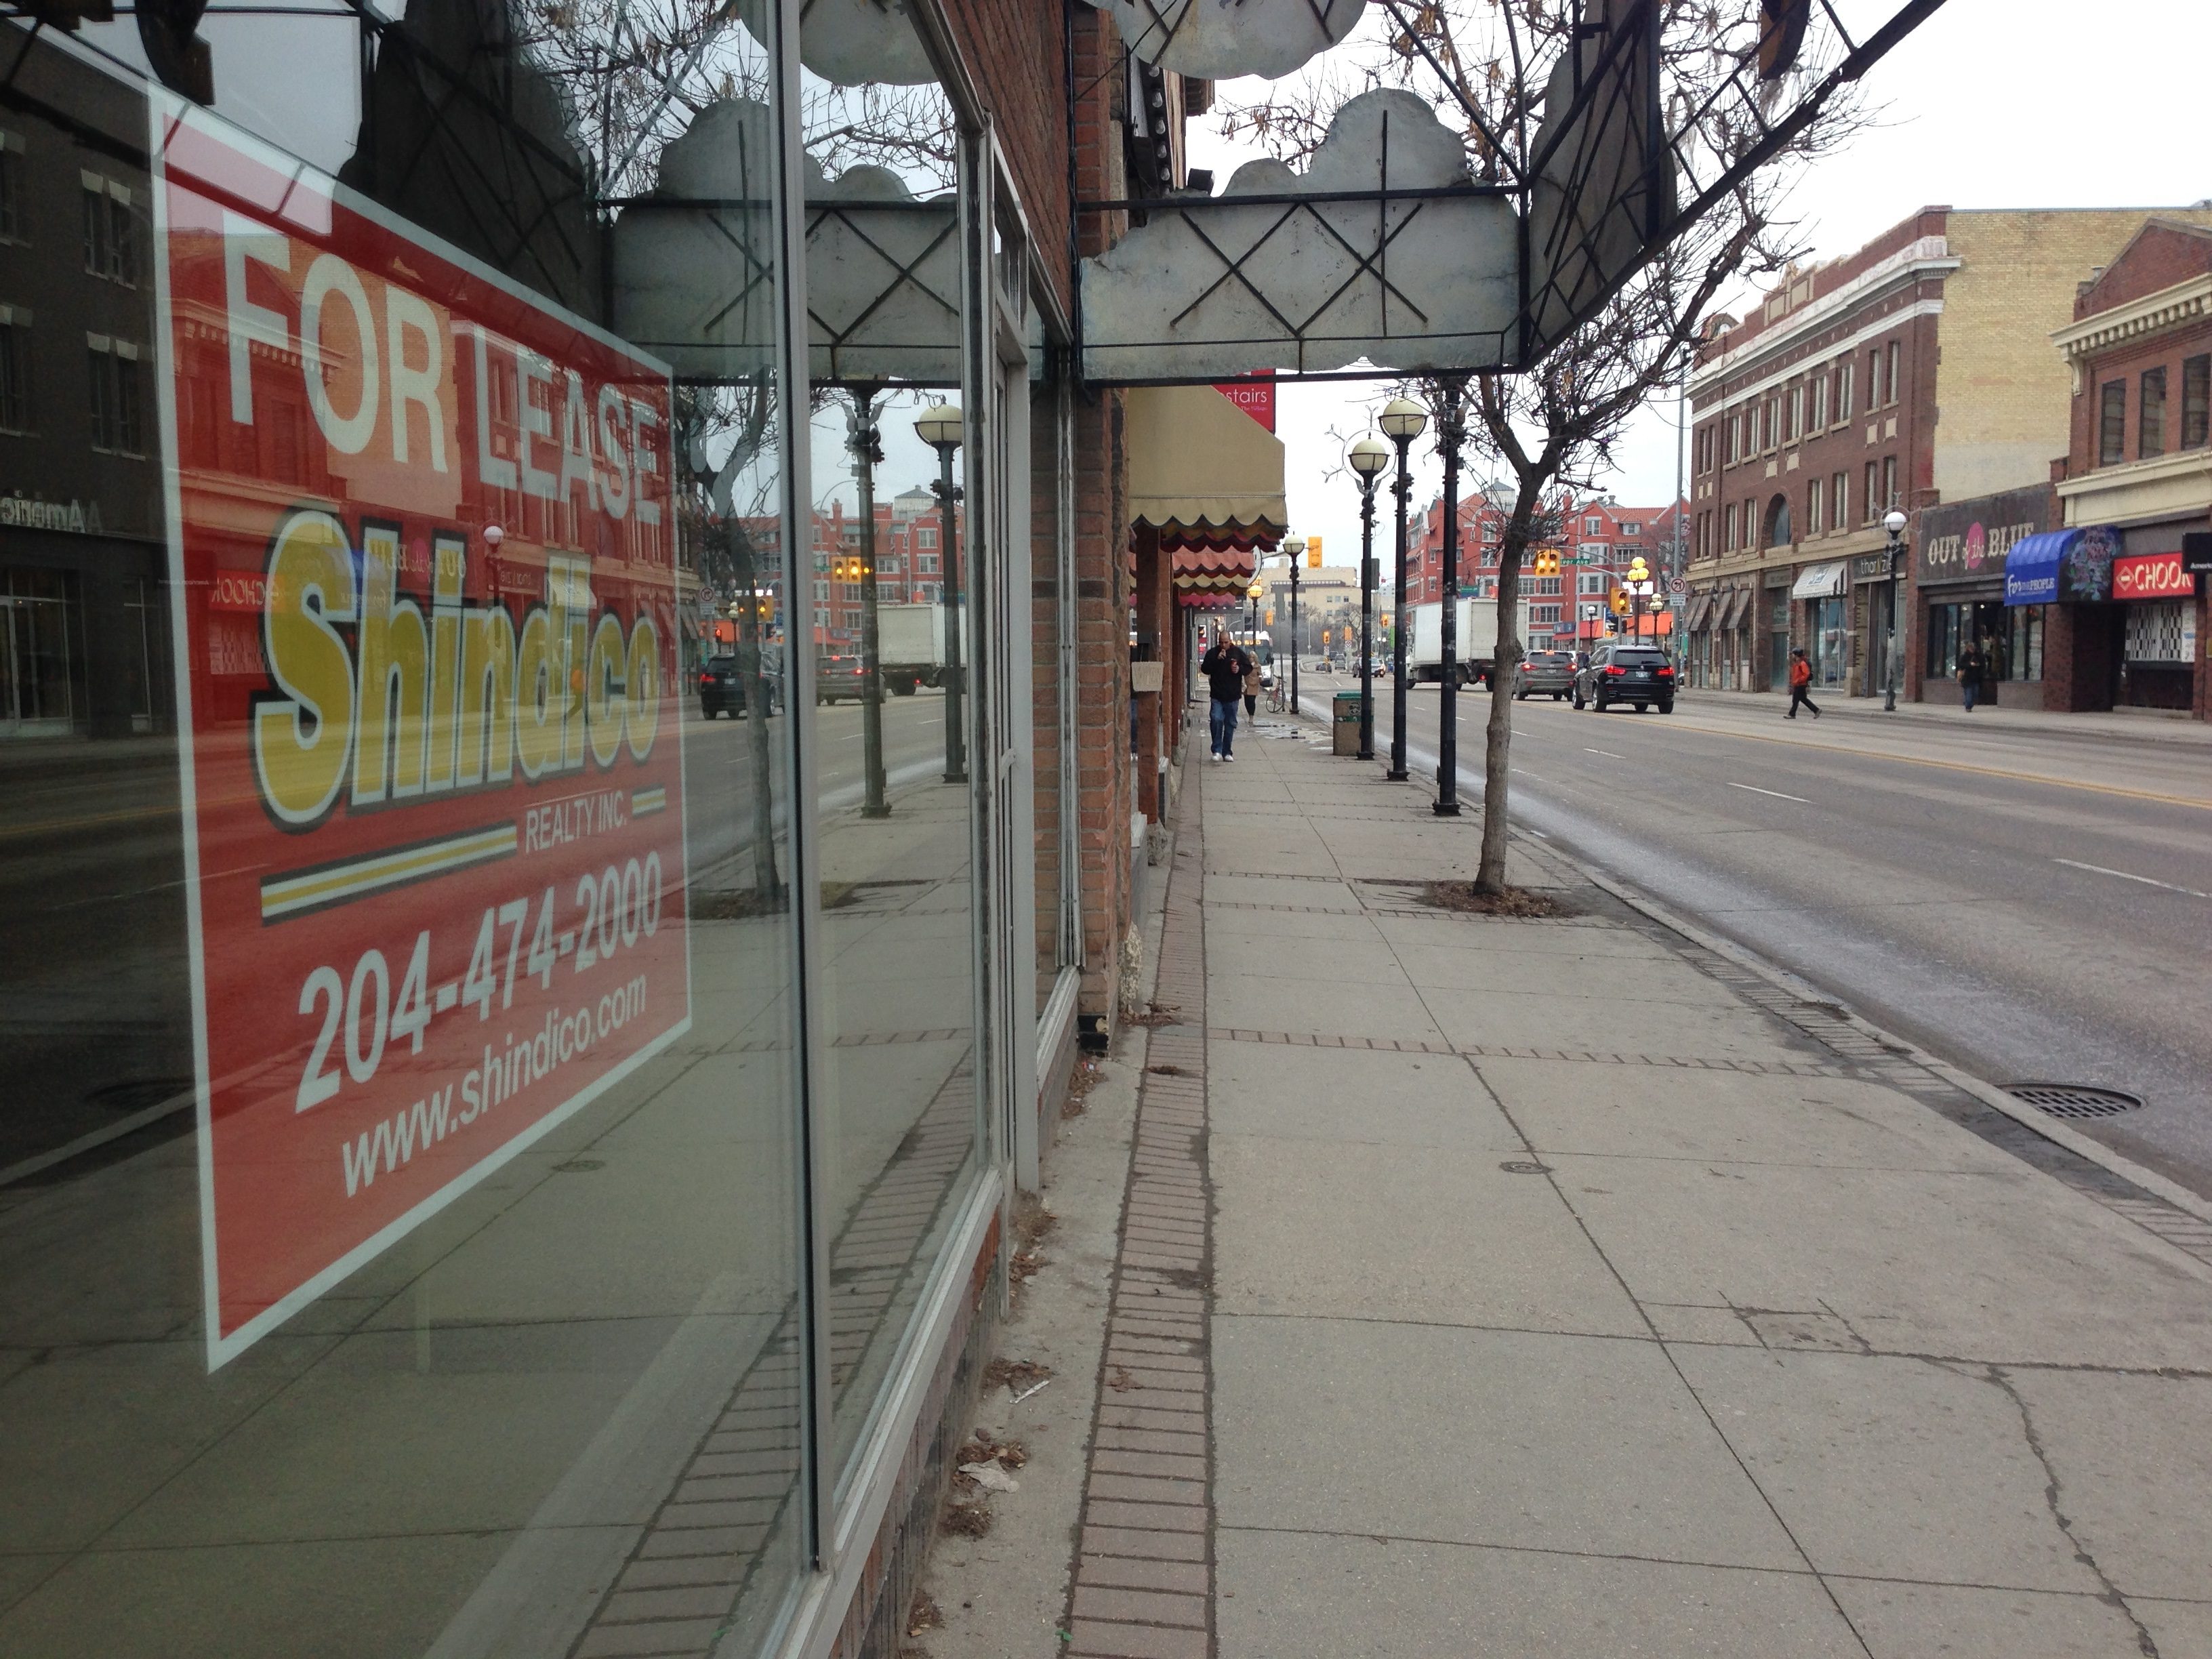 Osborne Village revitalizing with series of significant projects